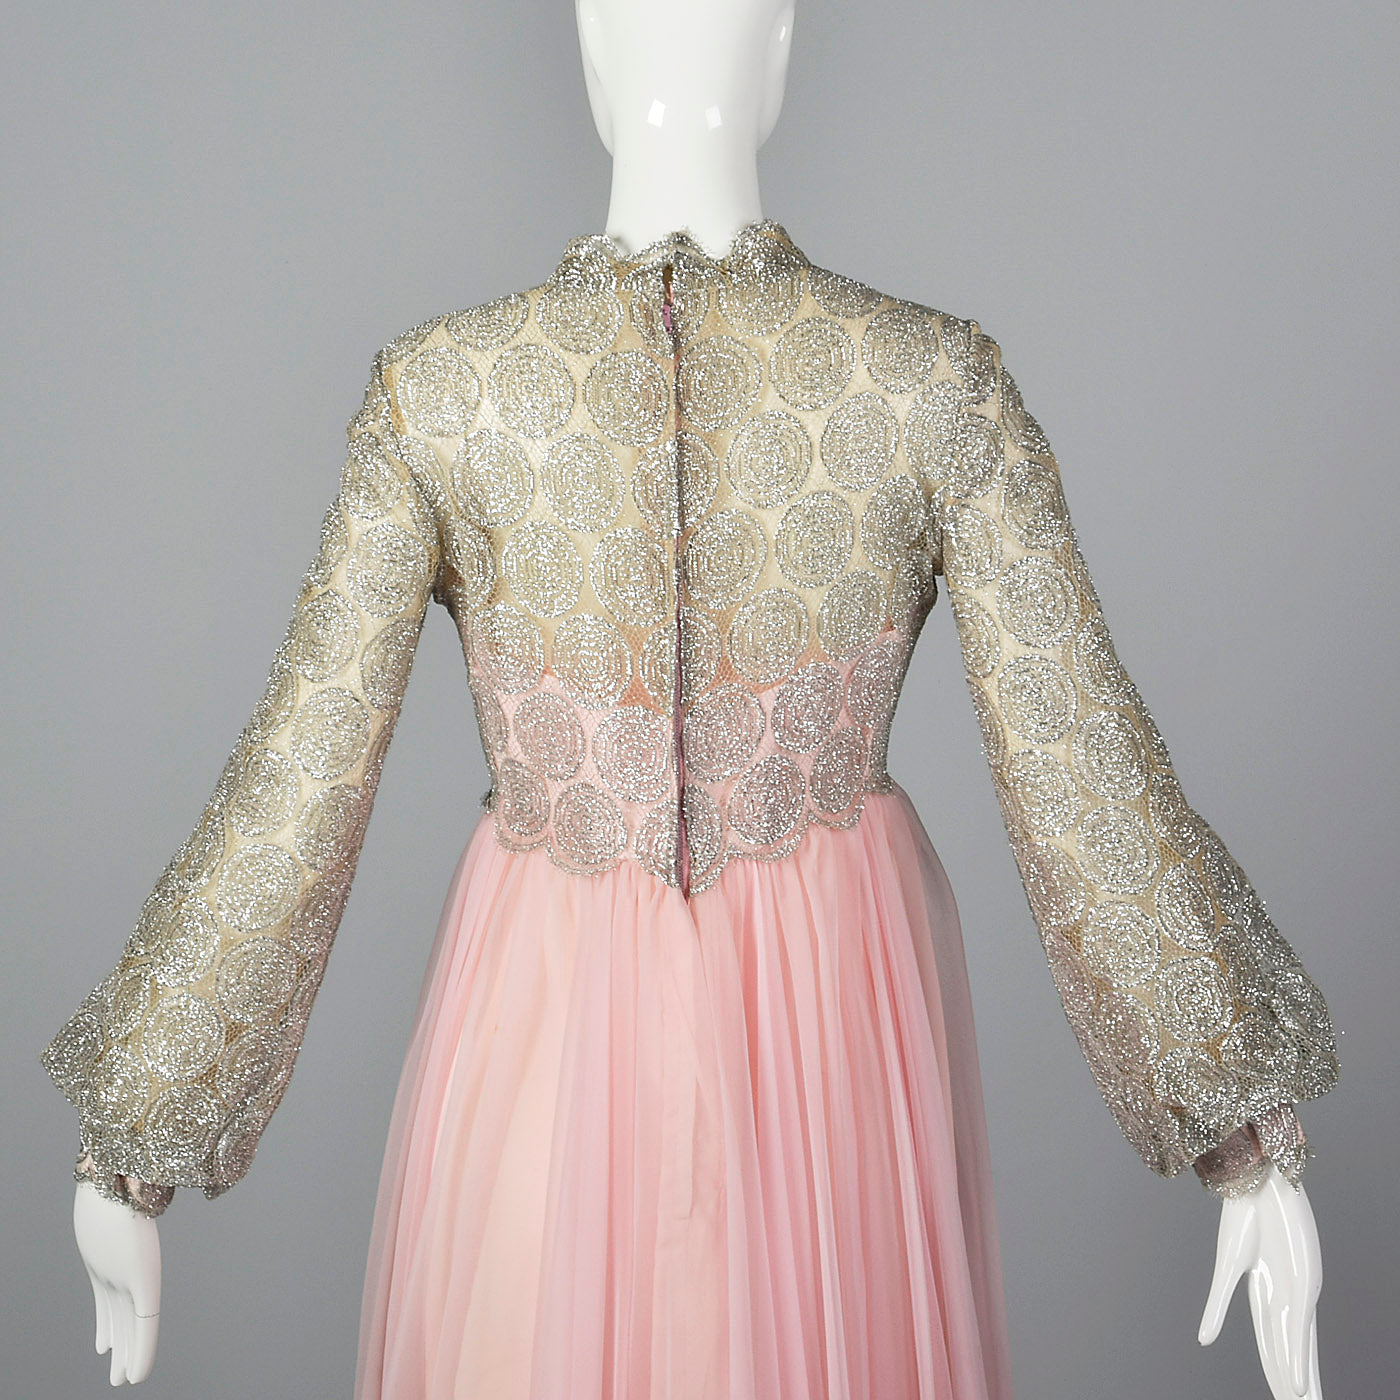 1960s Pink Dress with Silver Lace Overlay